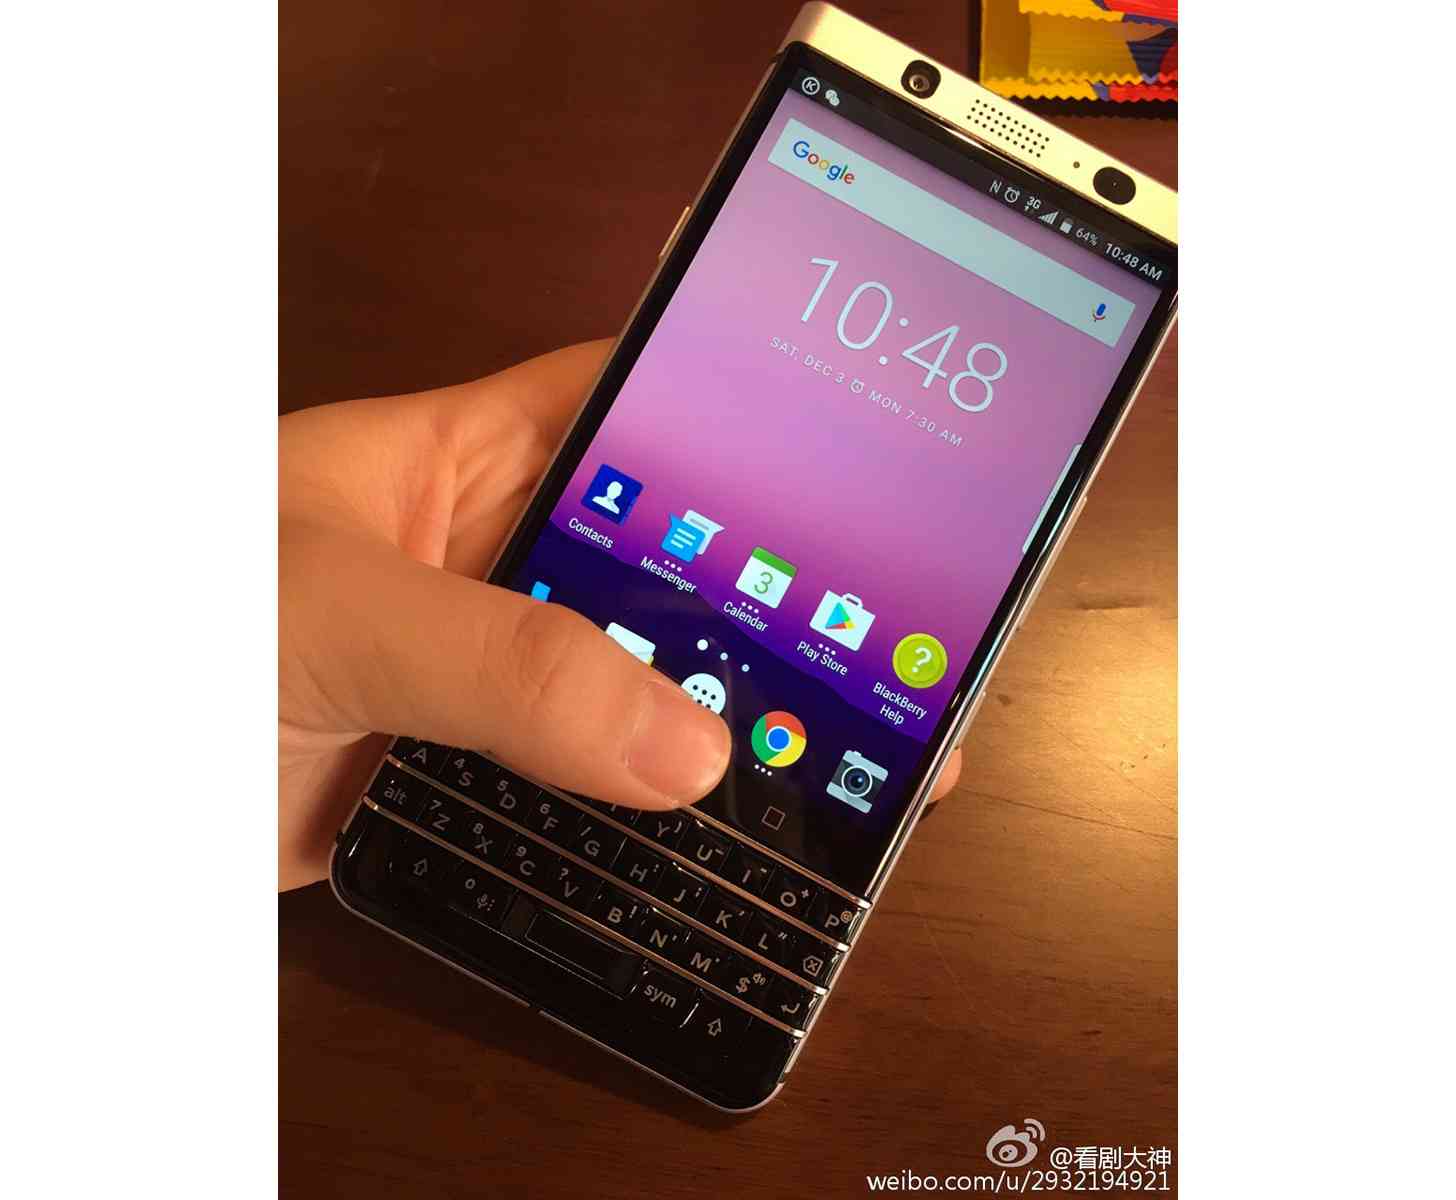 BlackBerry QWERTY Android phone photo leak hands-on